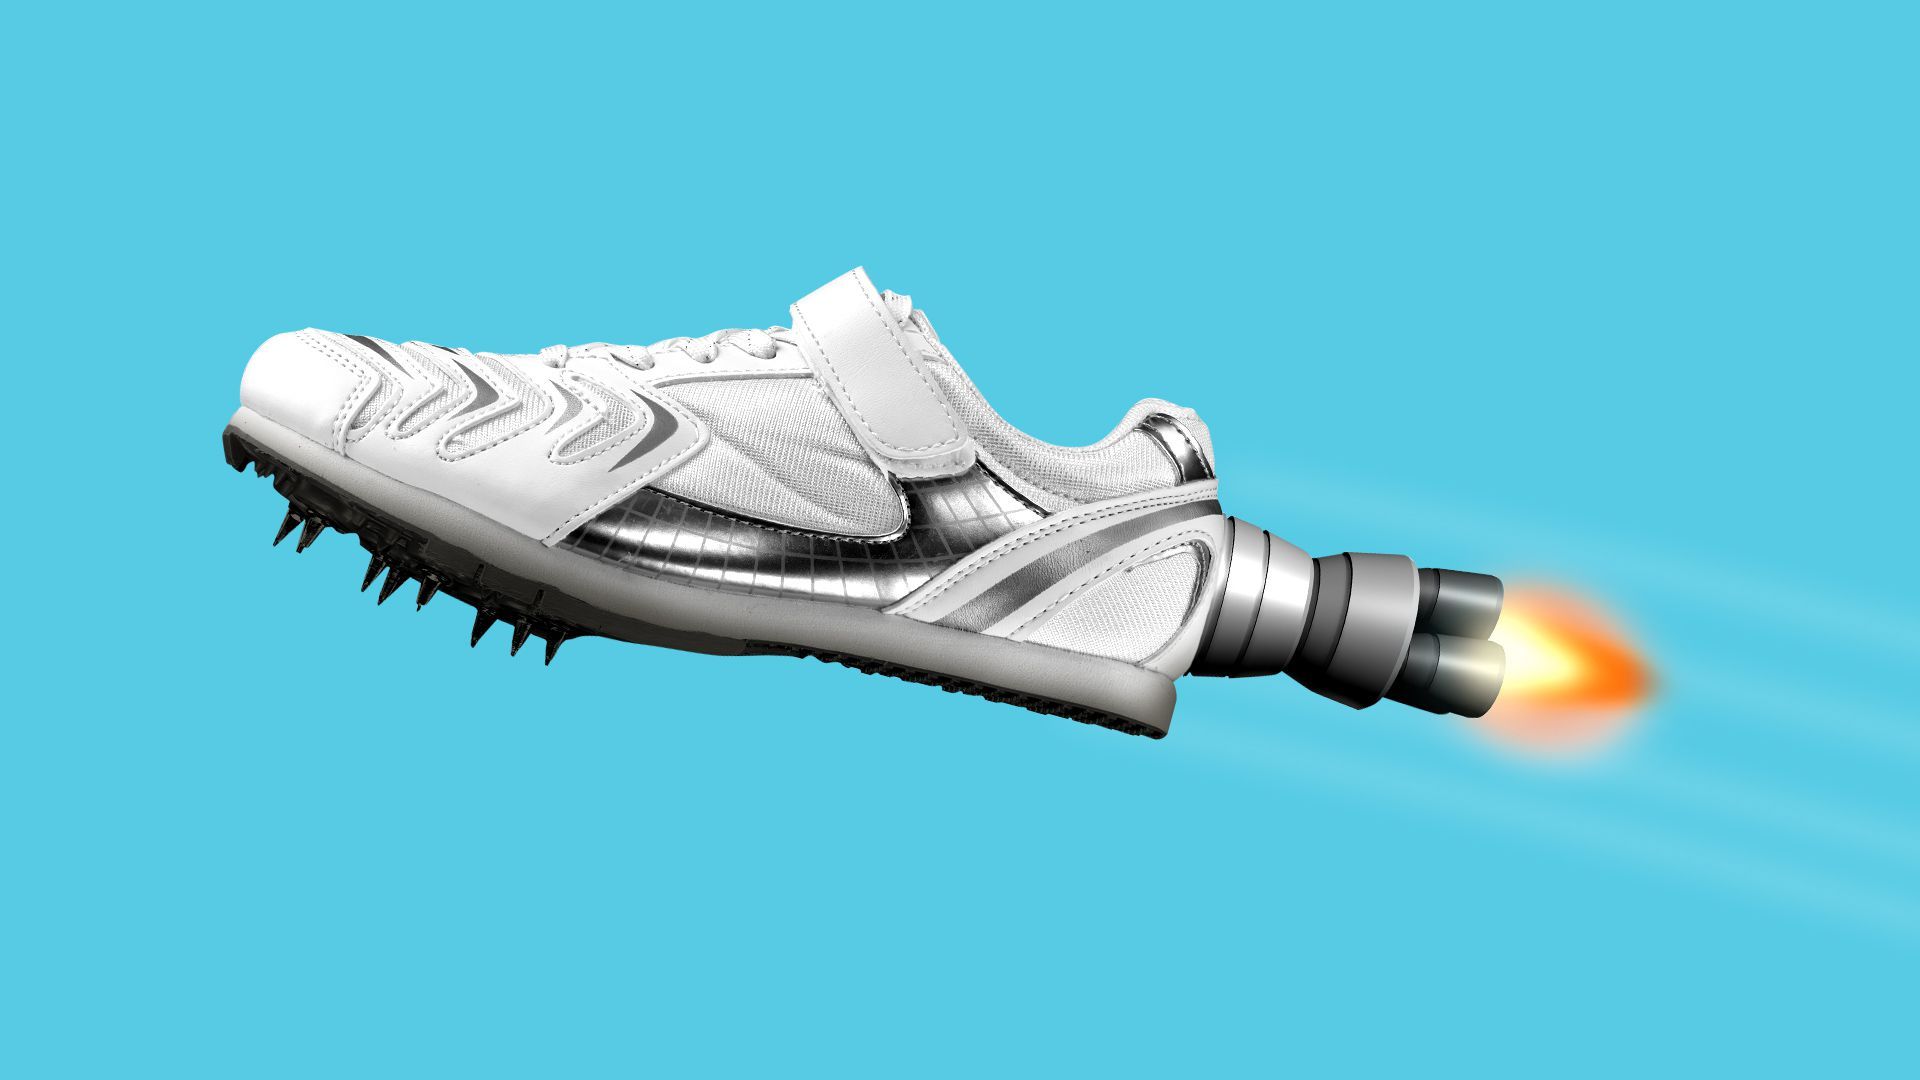 Illustration of a track shoe with a jetpack on the back